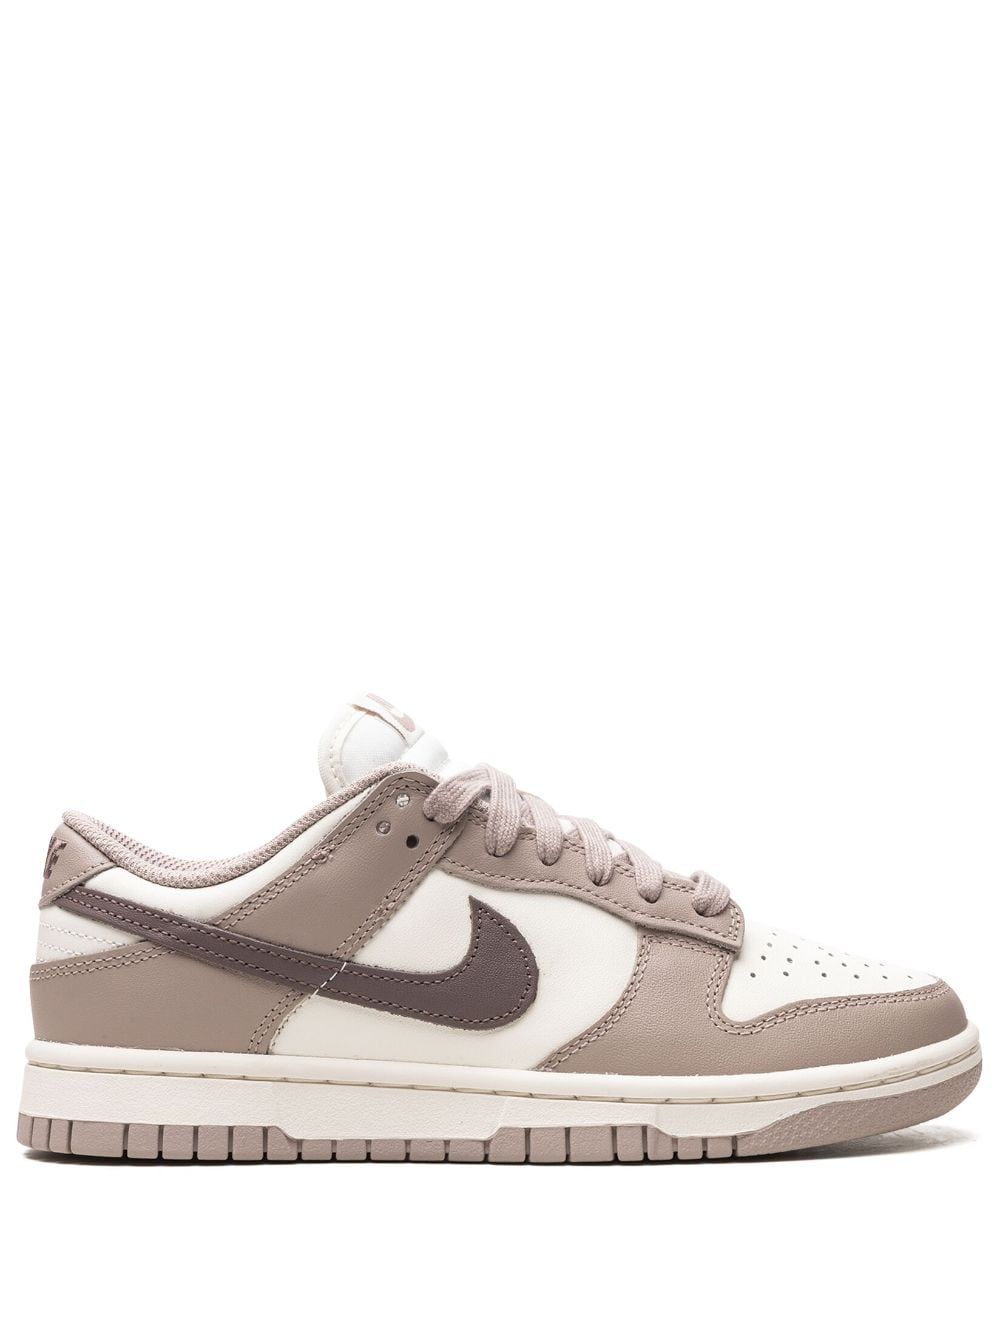 The DetailsNikeDunk Low "Diffused Taupe" sneakersNike's Dunk Low silhouette was designed to incor... | Farfetch Global